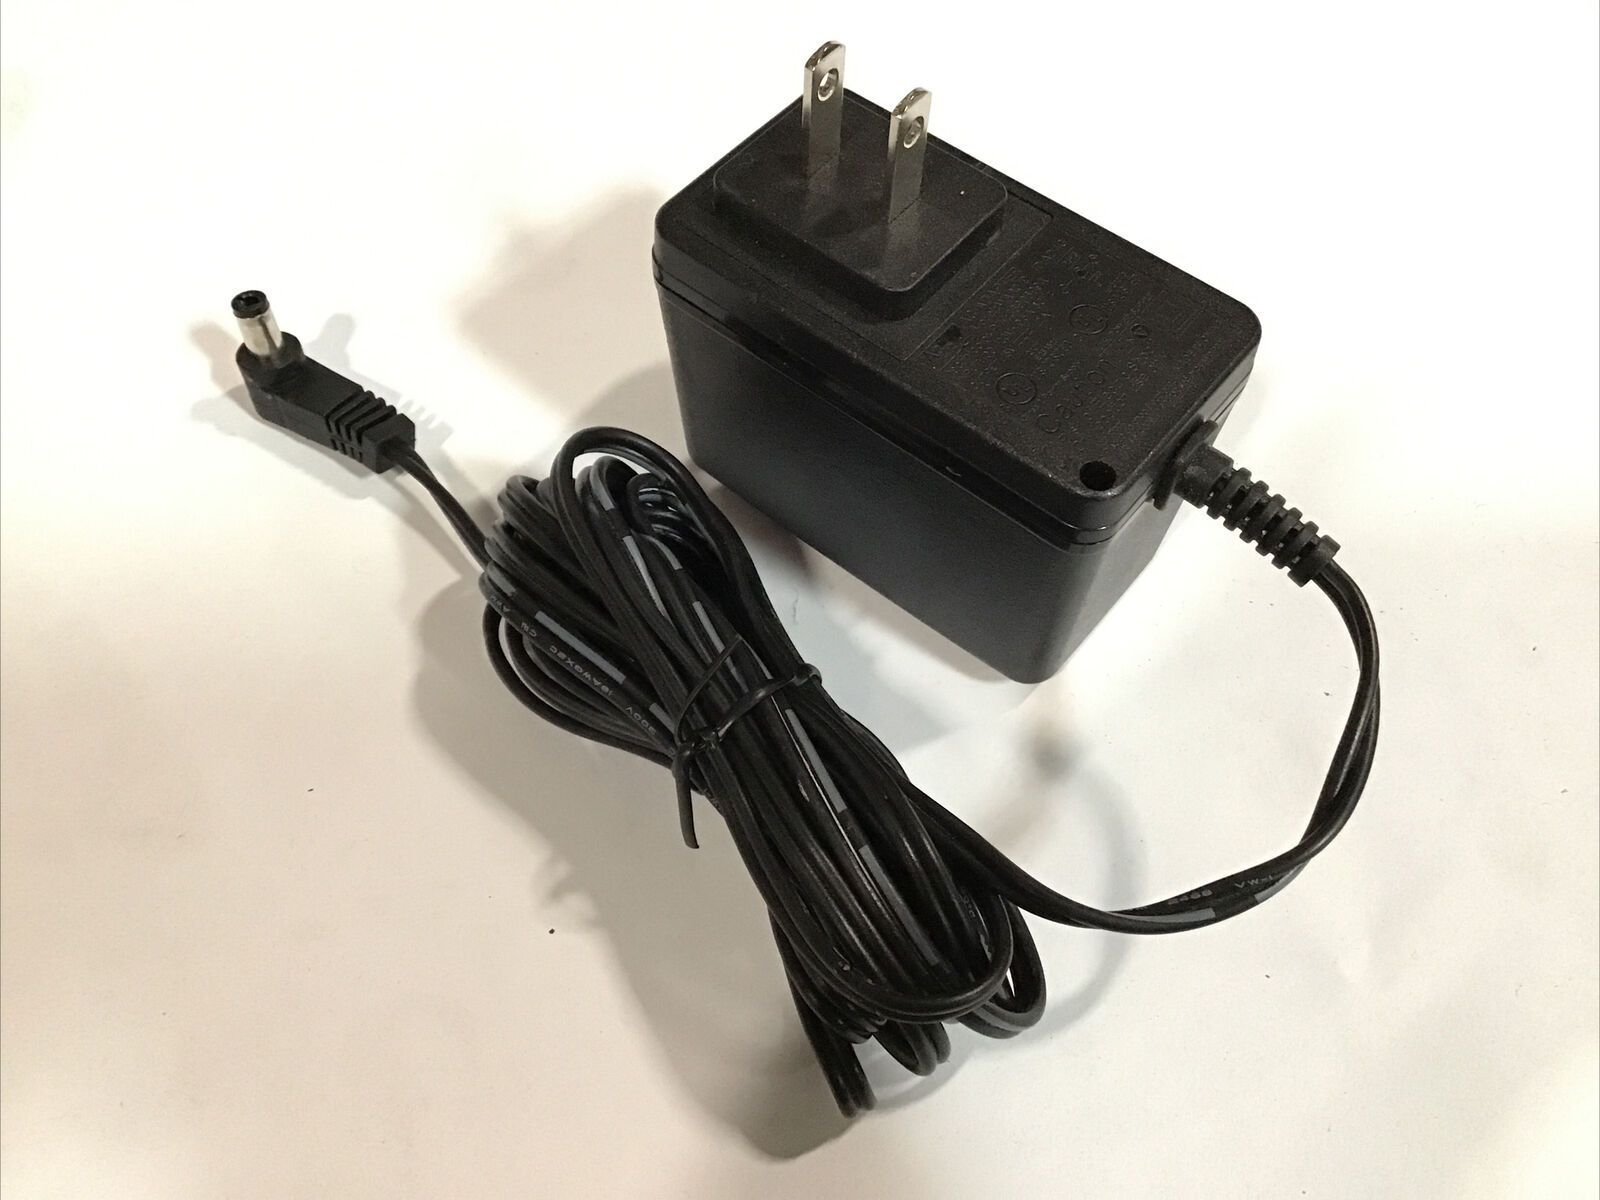 AcBel 15V 1.2A AC Adapter WAA019 100-120V Charger Power Supply 3690699A Type AC/DC Adapter Features Powered Compatible